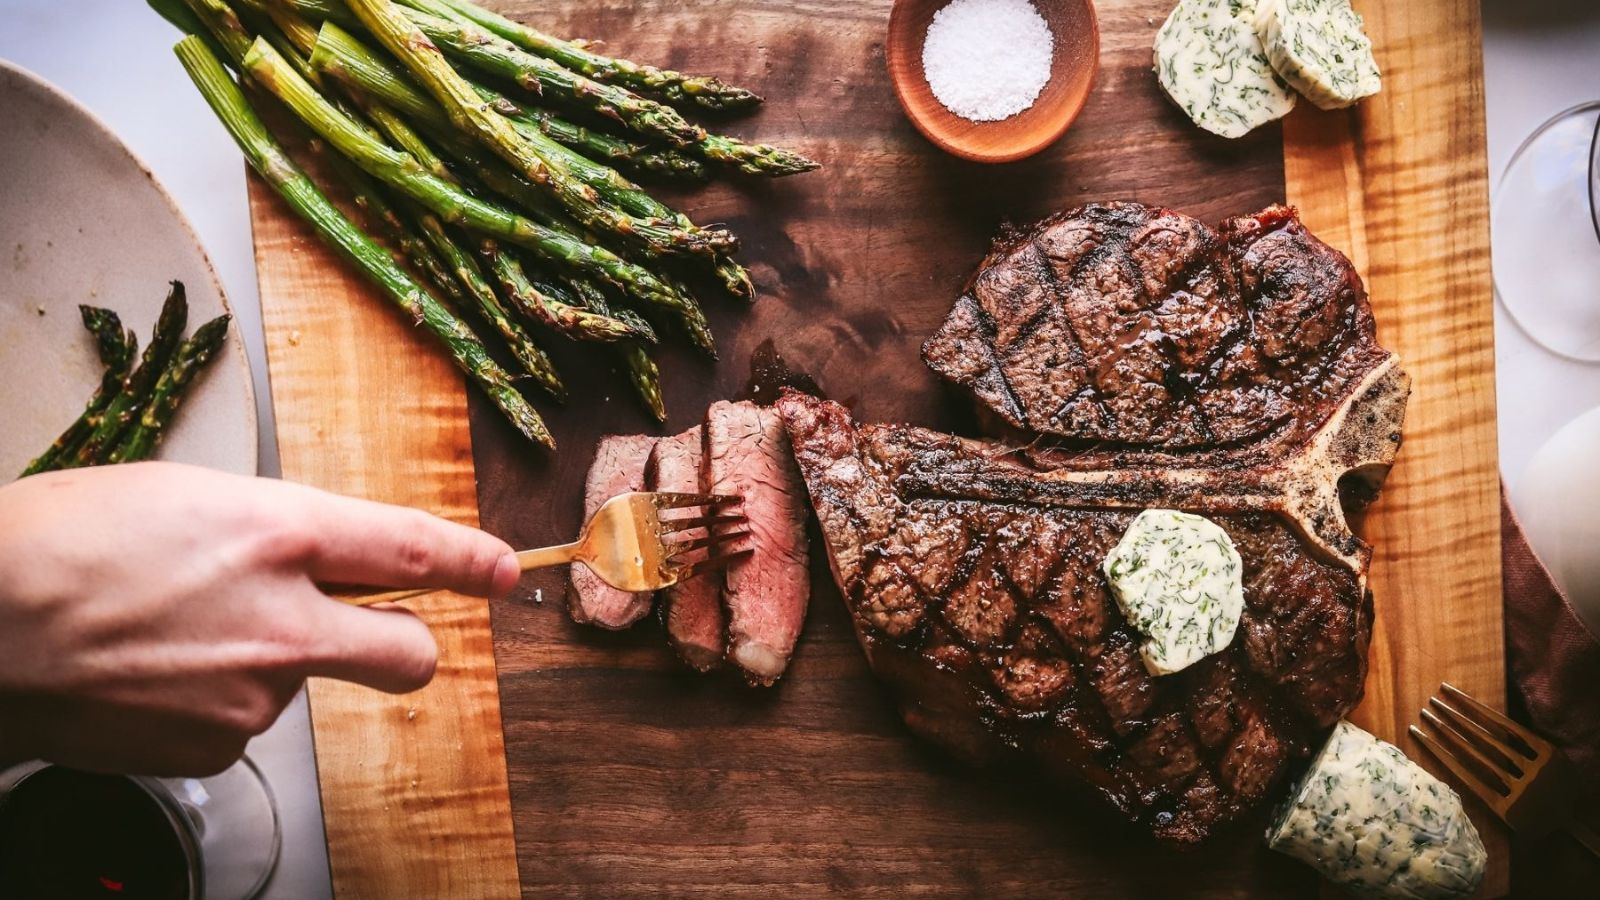 Start The Grilling Season Right With These 26 Mouthwatering Recipes